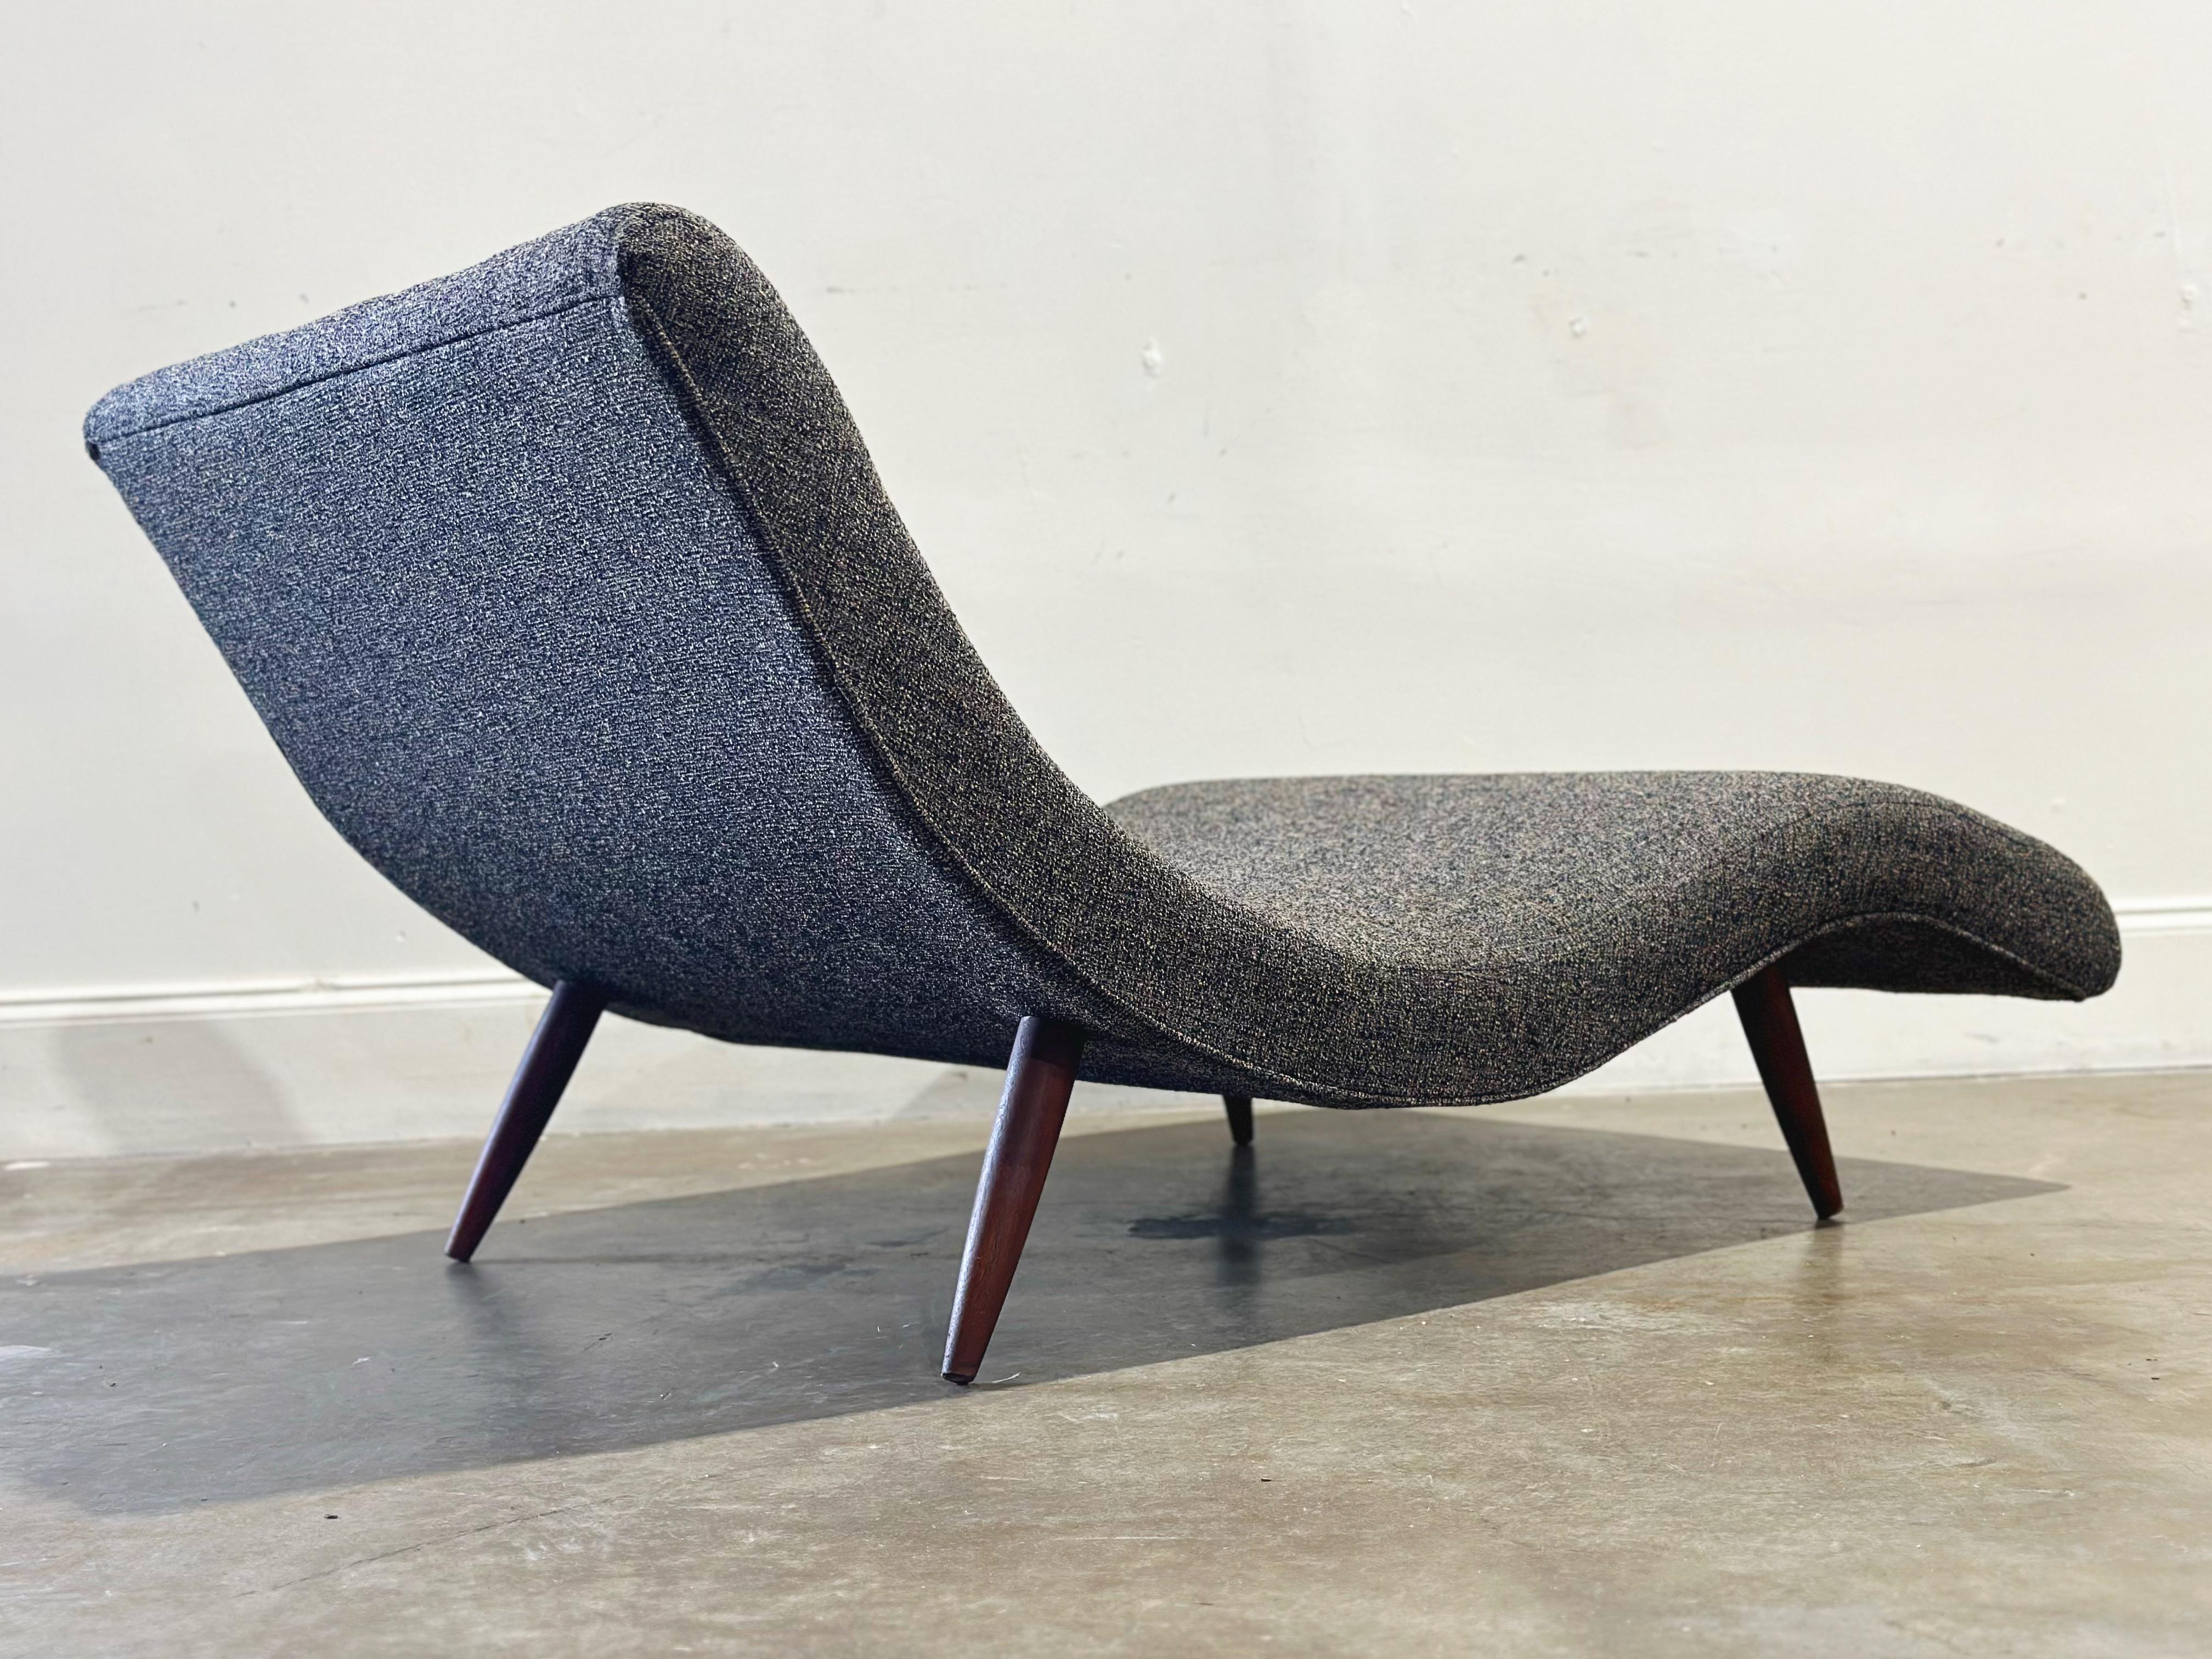 Mid-20th Century Midcentury Modern Adrian Pearsall Wave Chaise Lounge - Modernist Lounge Chair